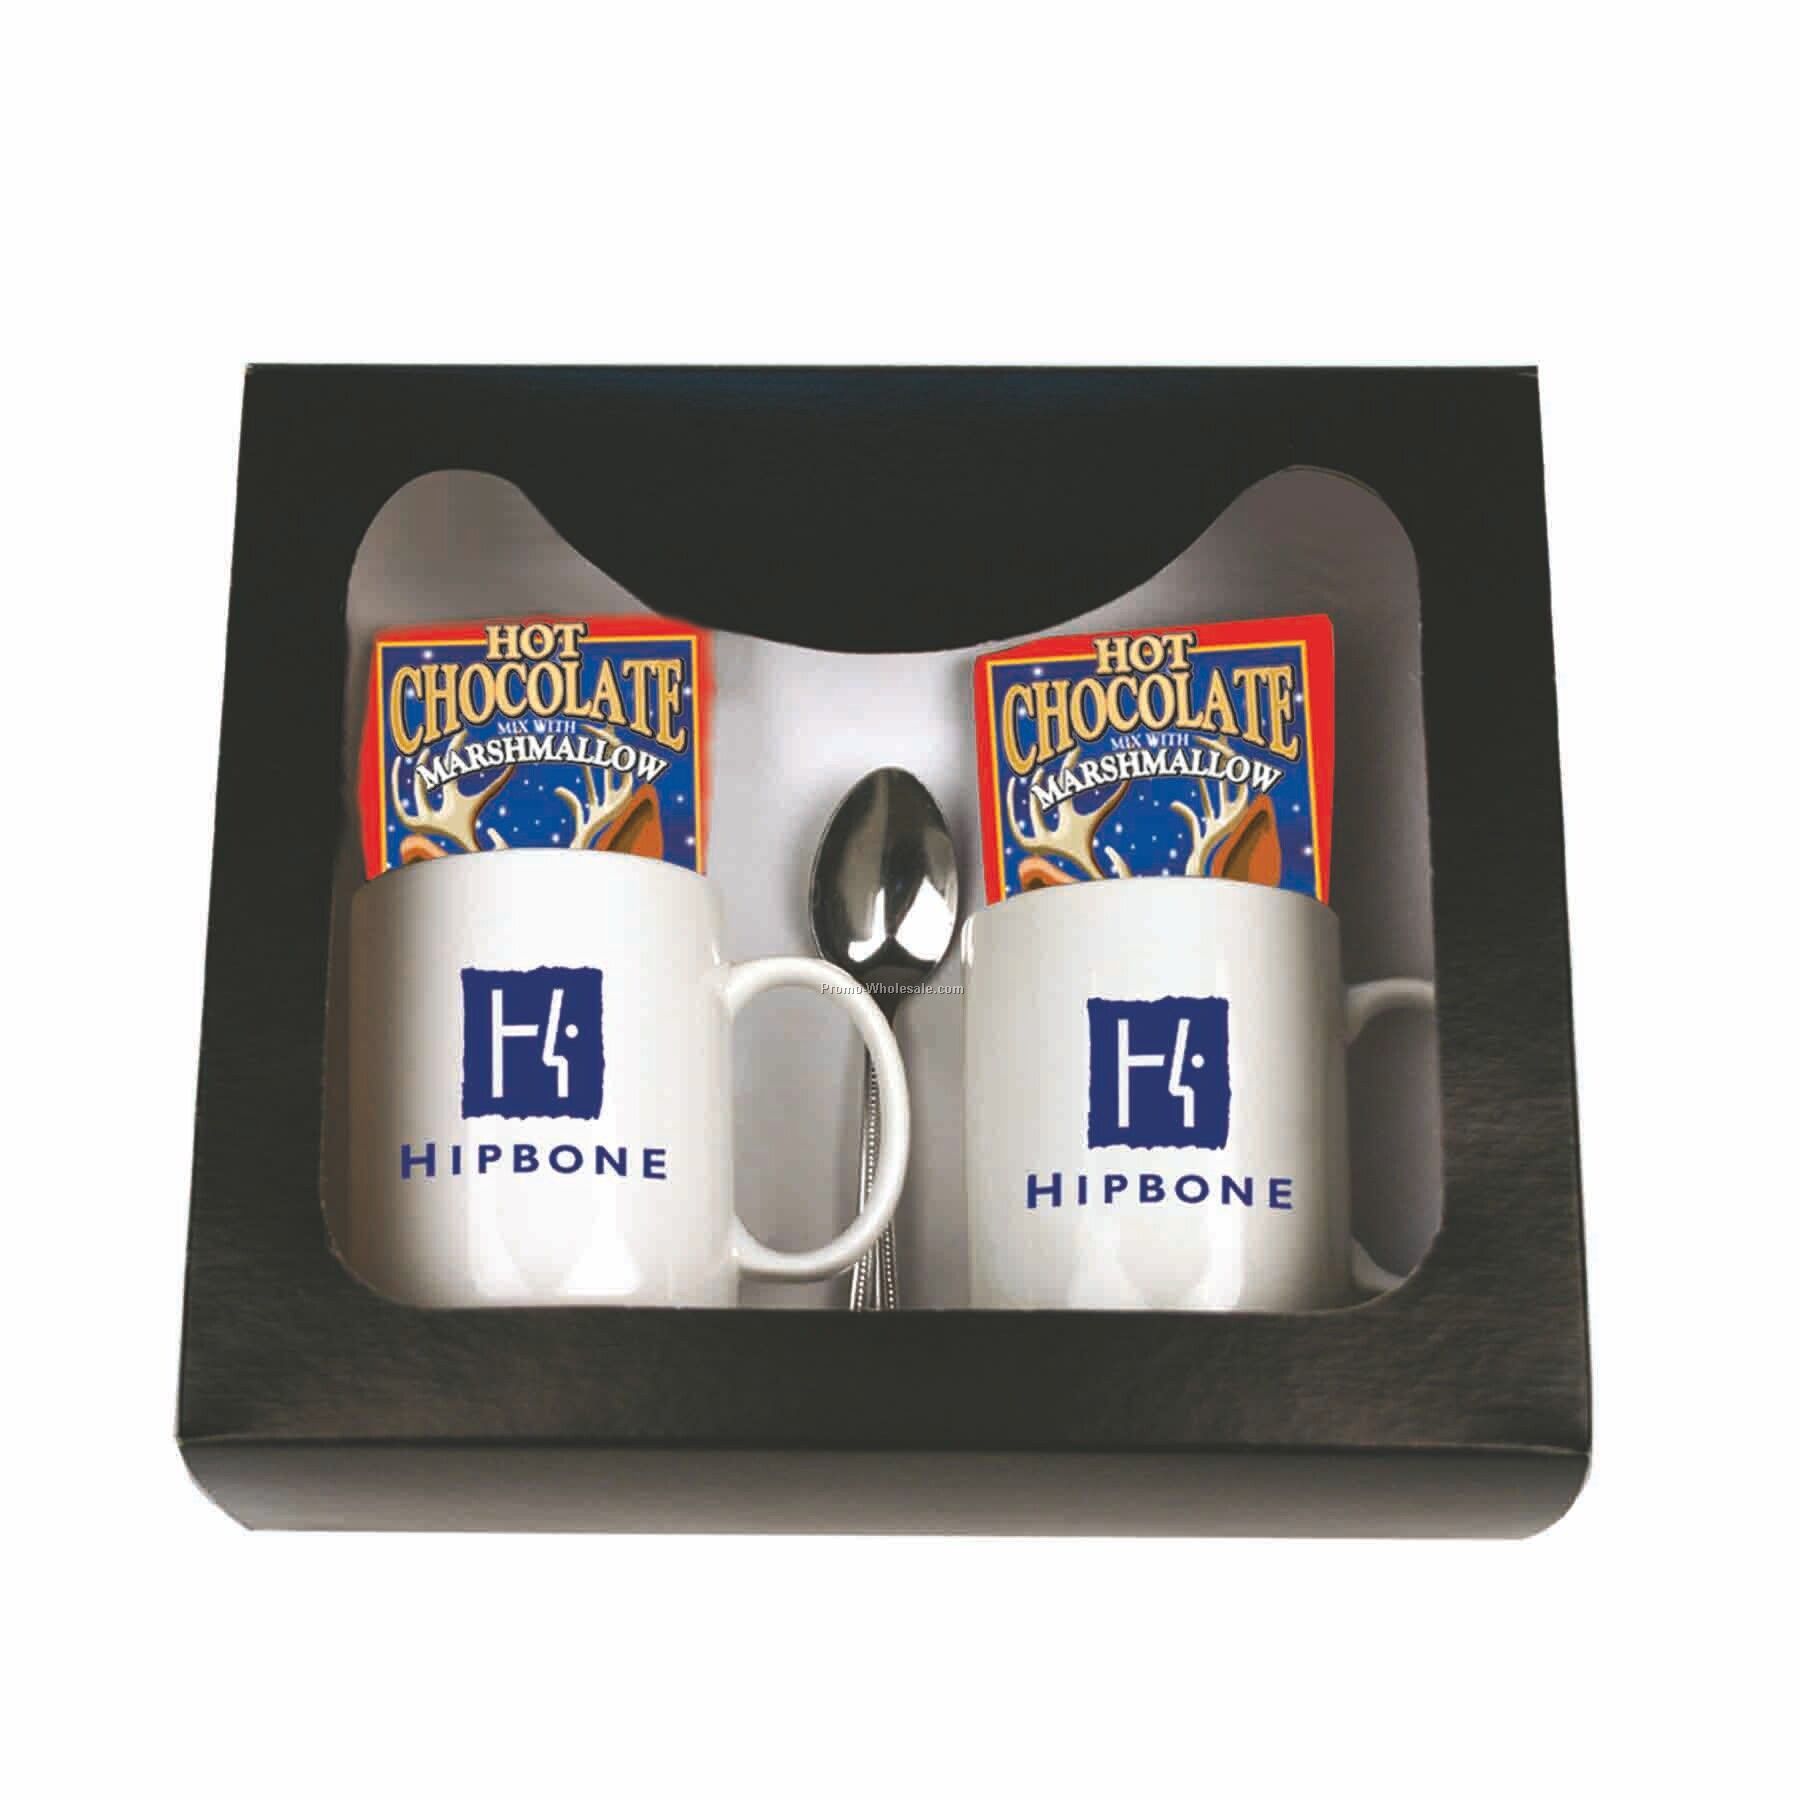 Hot Chocolate For 2 Gourmet Gift Set (Hot Chocolate W/ Marshmallows)